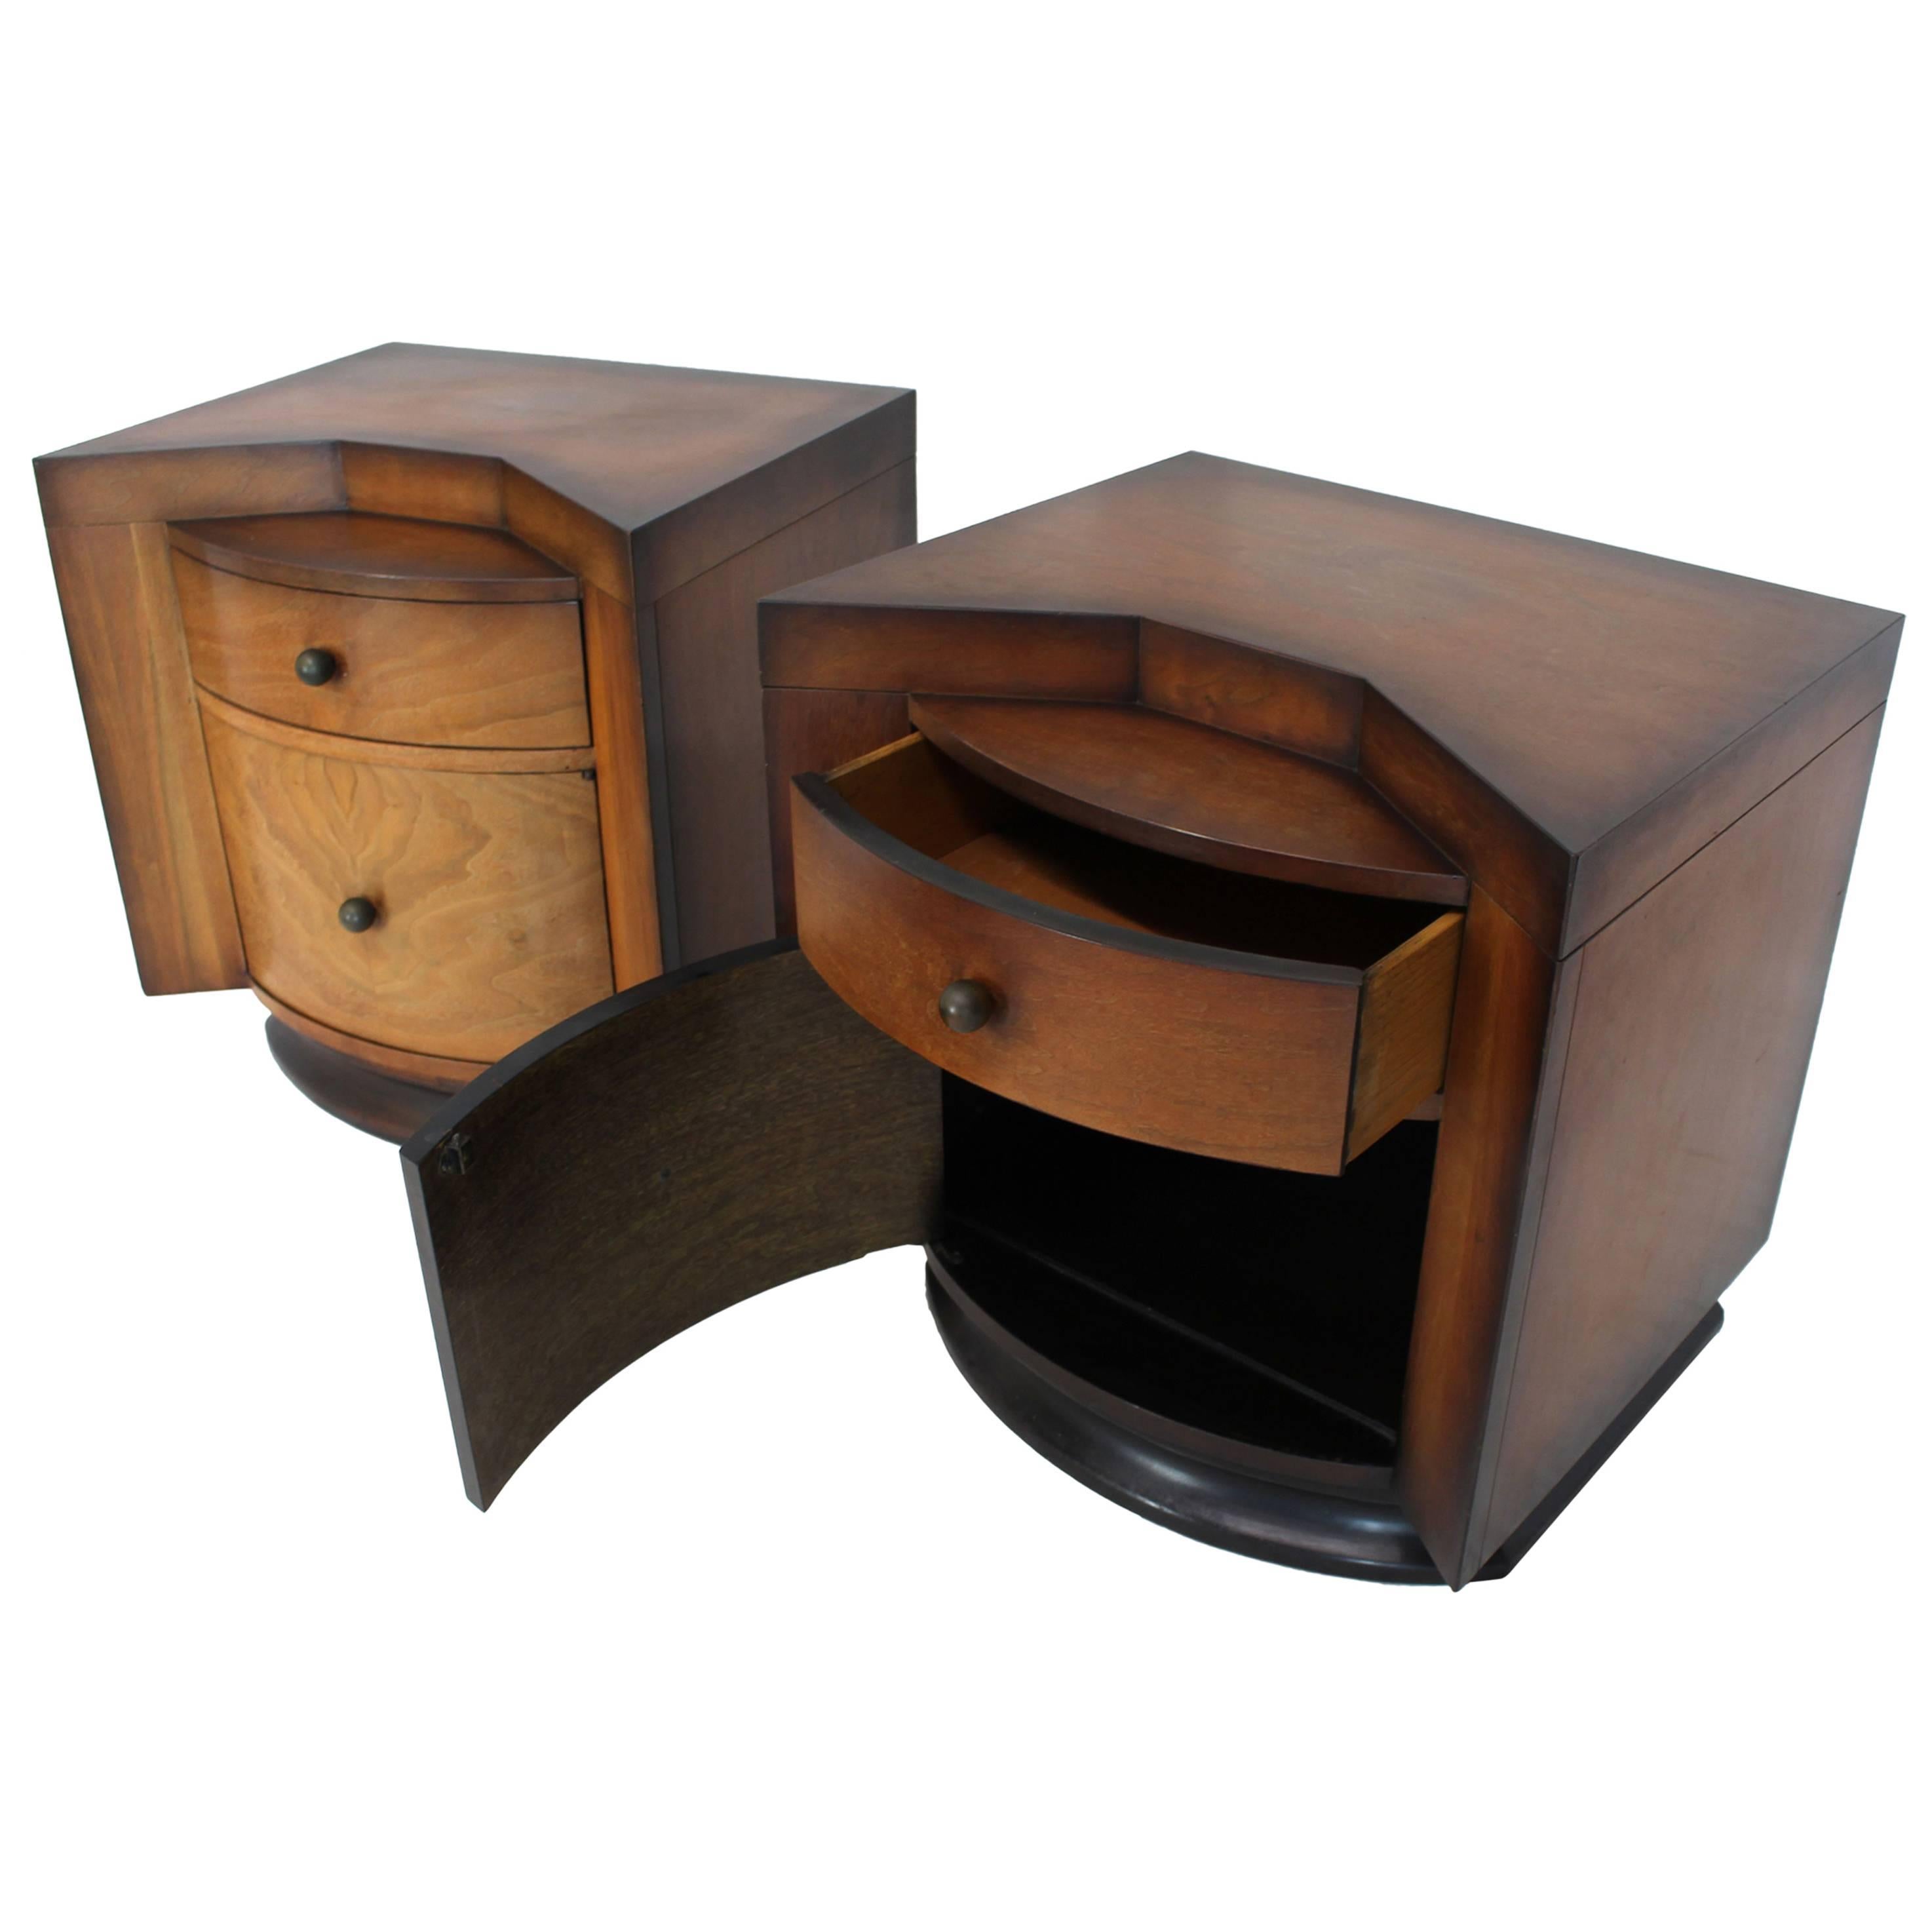 Pair of Deco Full Bodied Design Midcentury Nightstands End Tables Brass Pulls For Sale